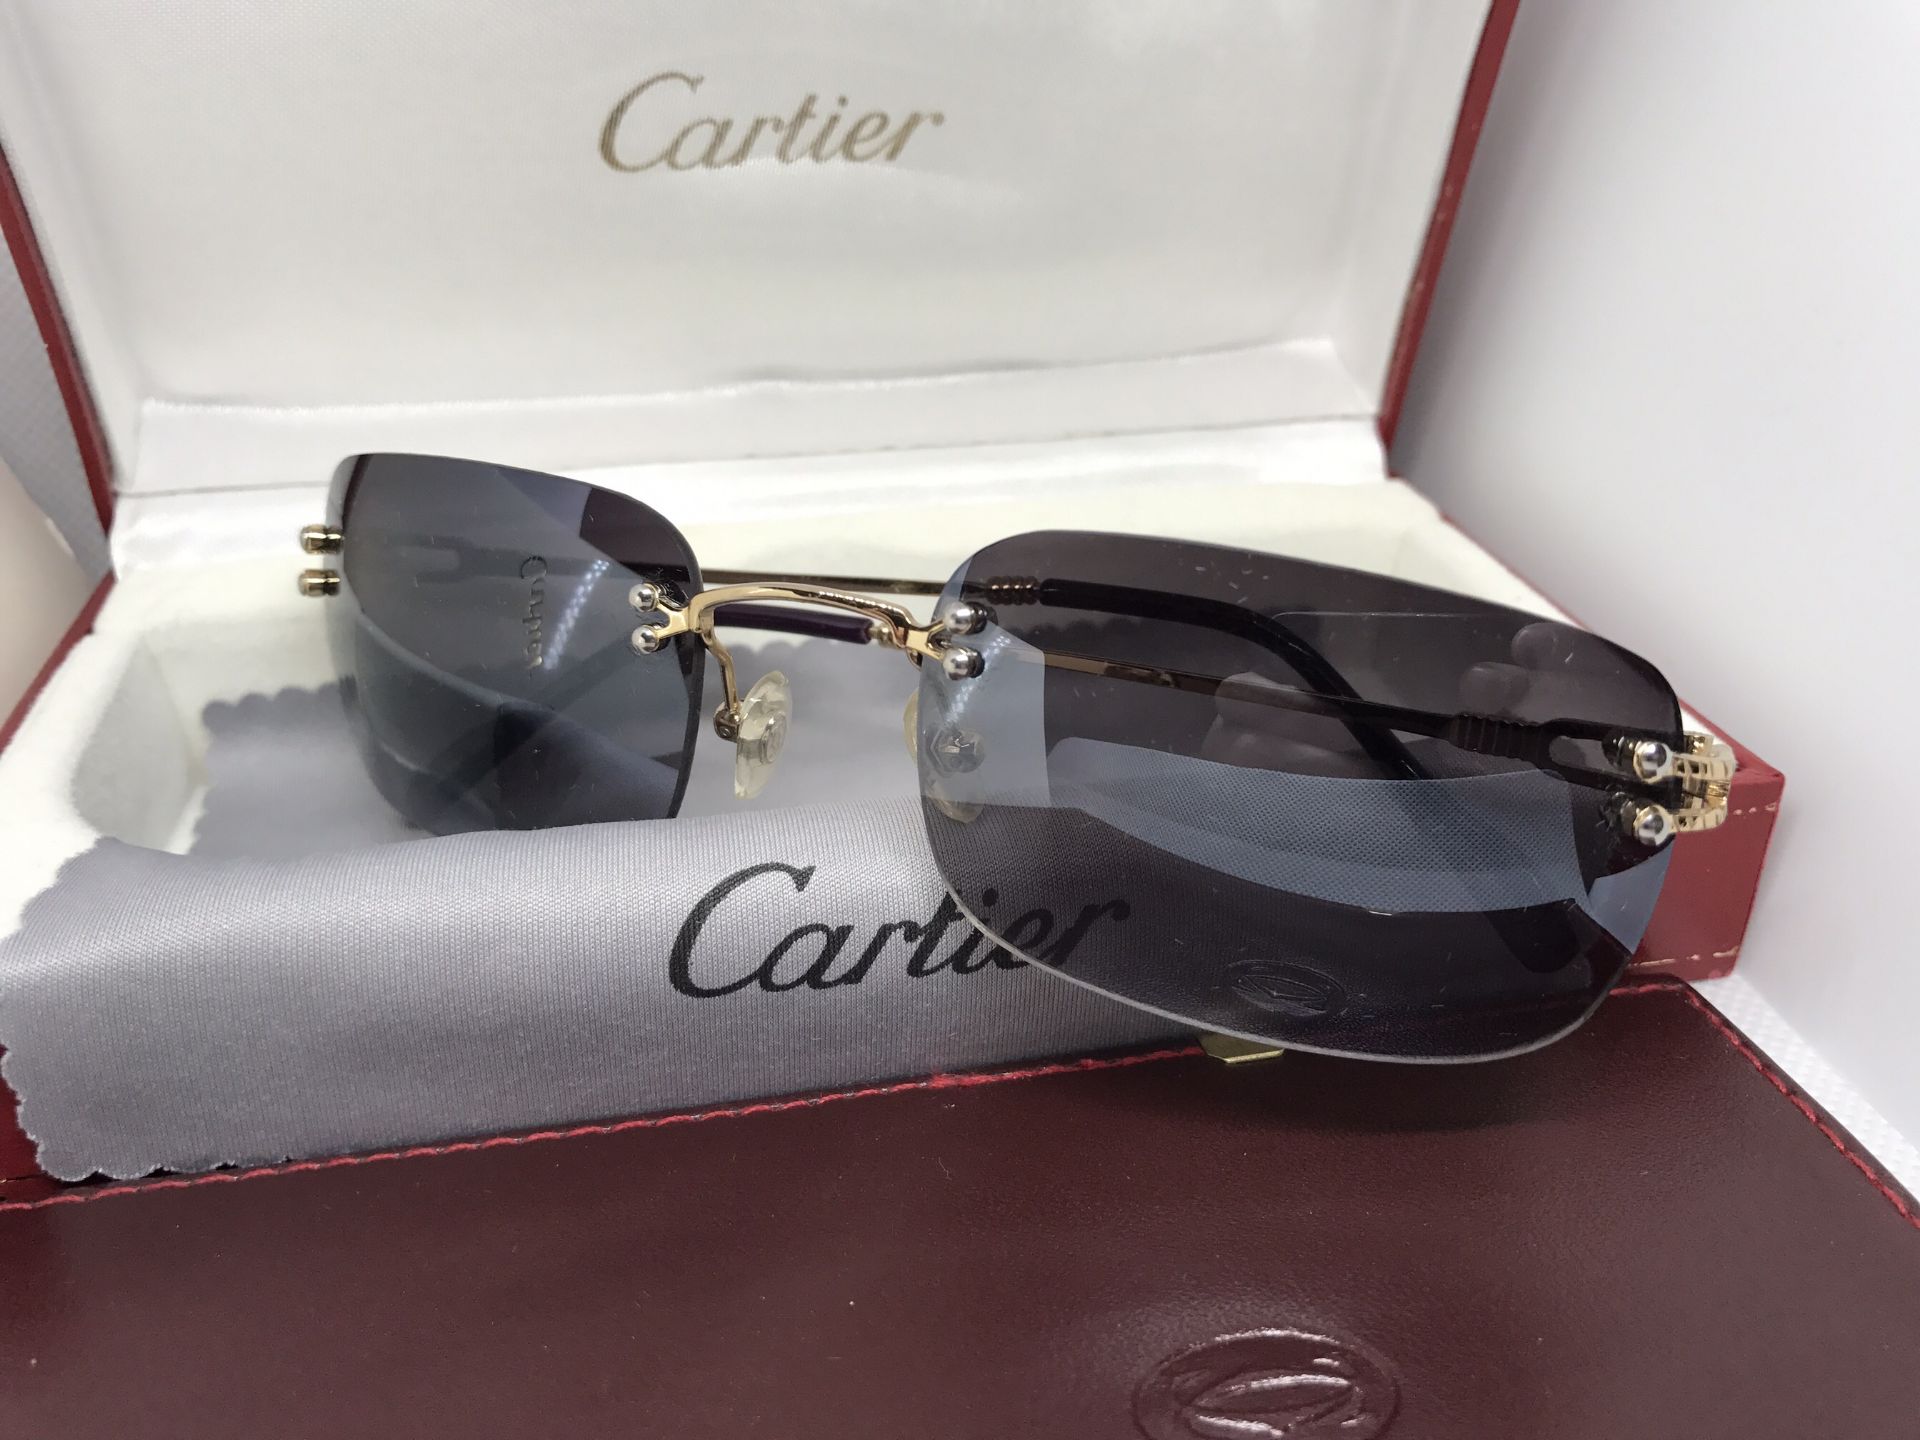 CARTIER SUNGLASSES WITH BOX & CASE